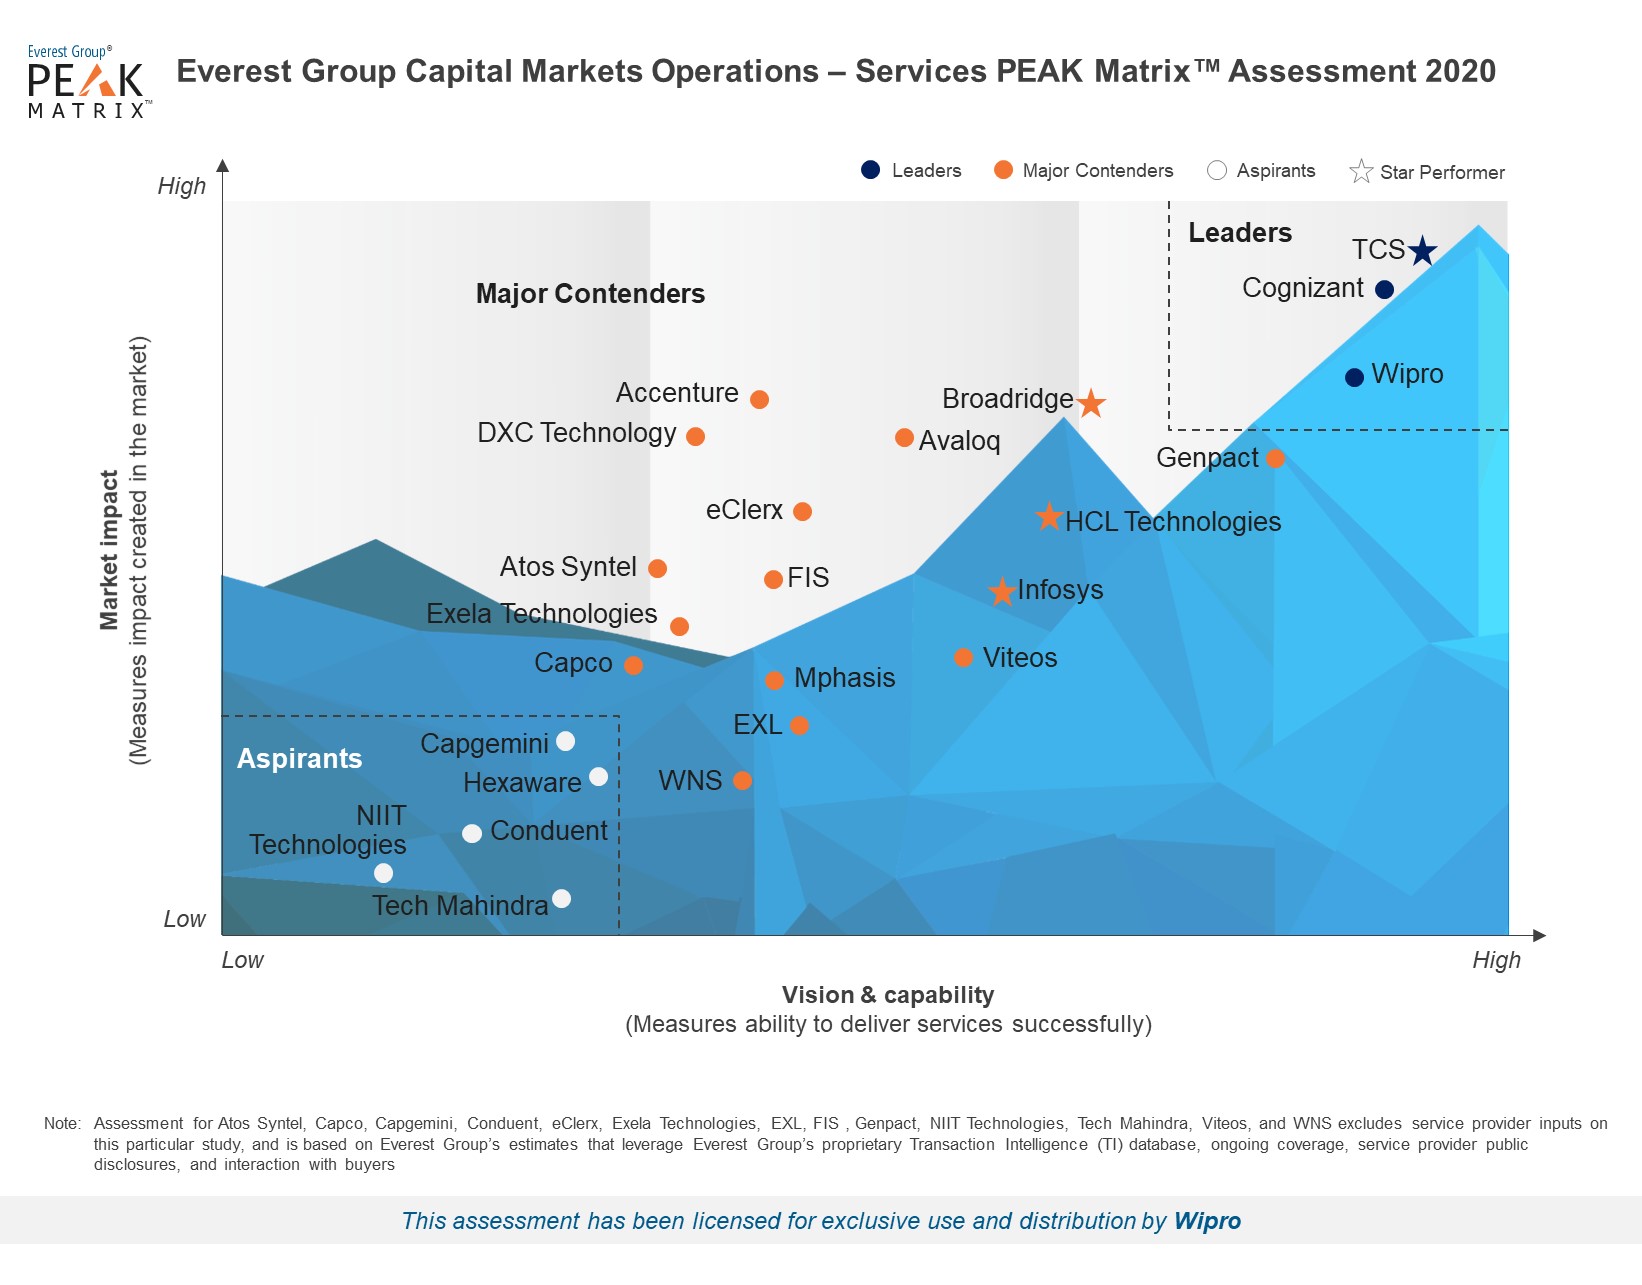 Wipro positioned as a Leader in Capital Markets Operations PEAK Matrix™ 2020